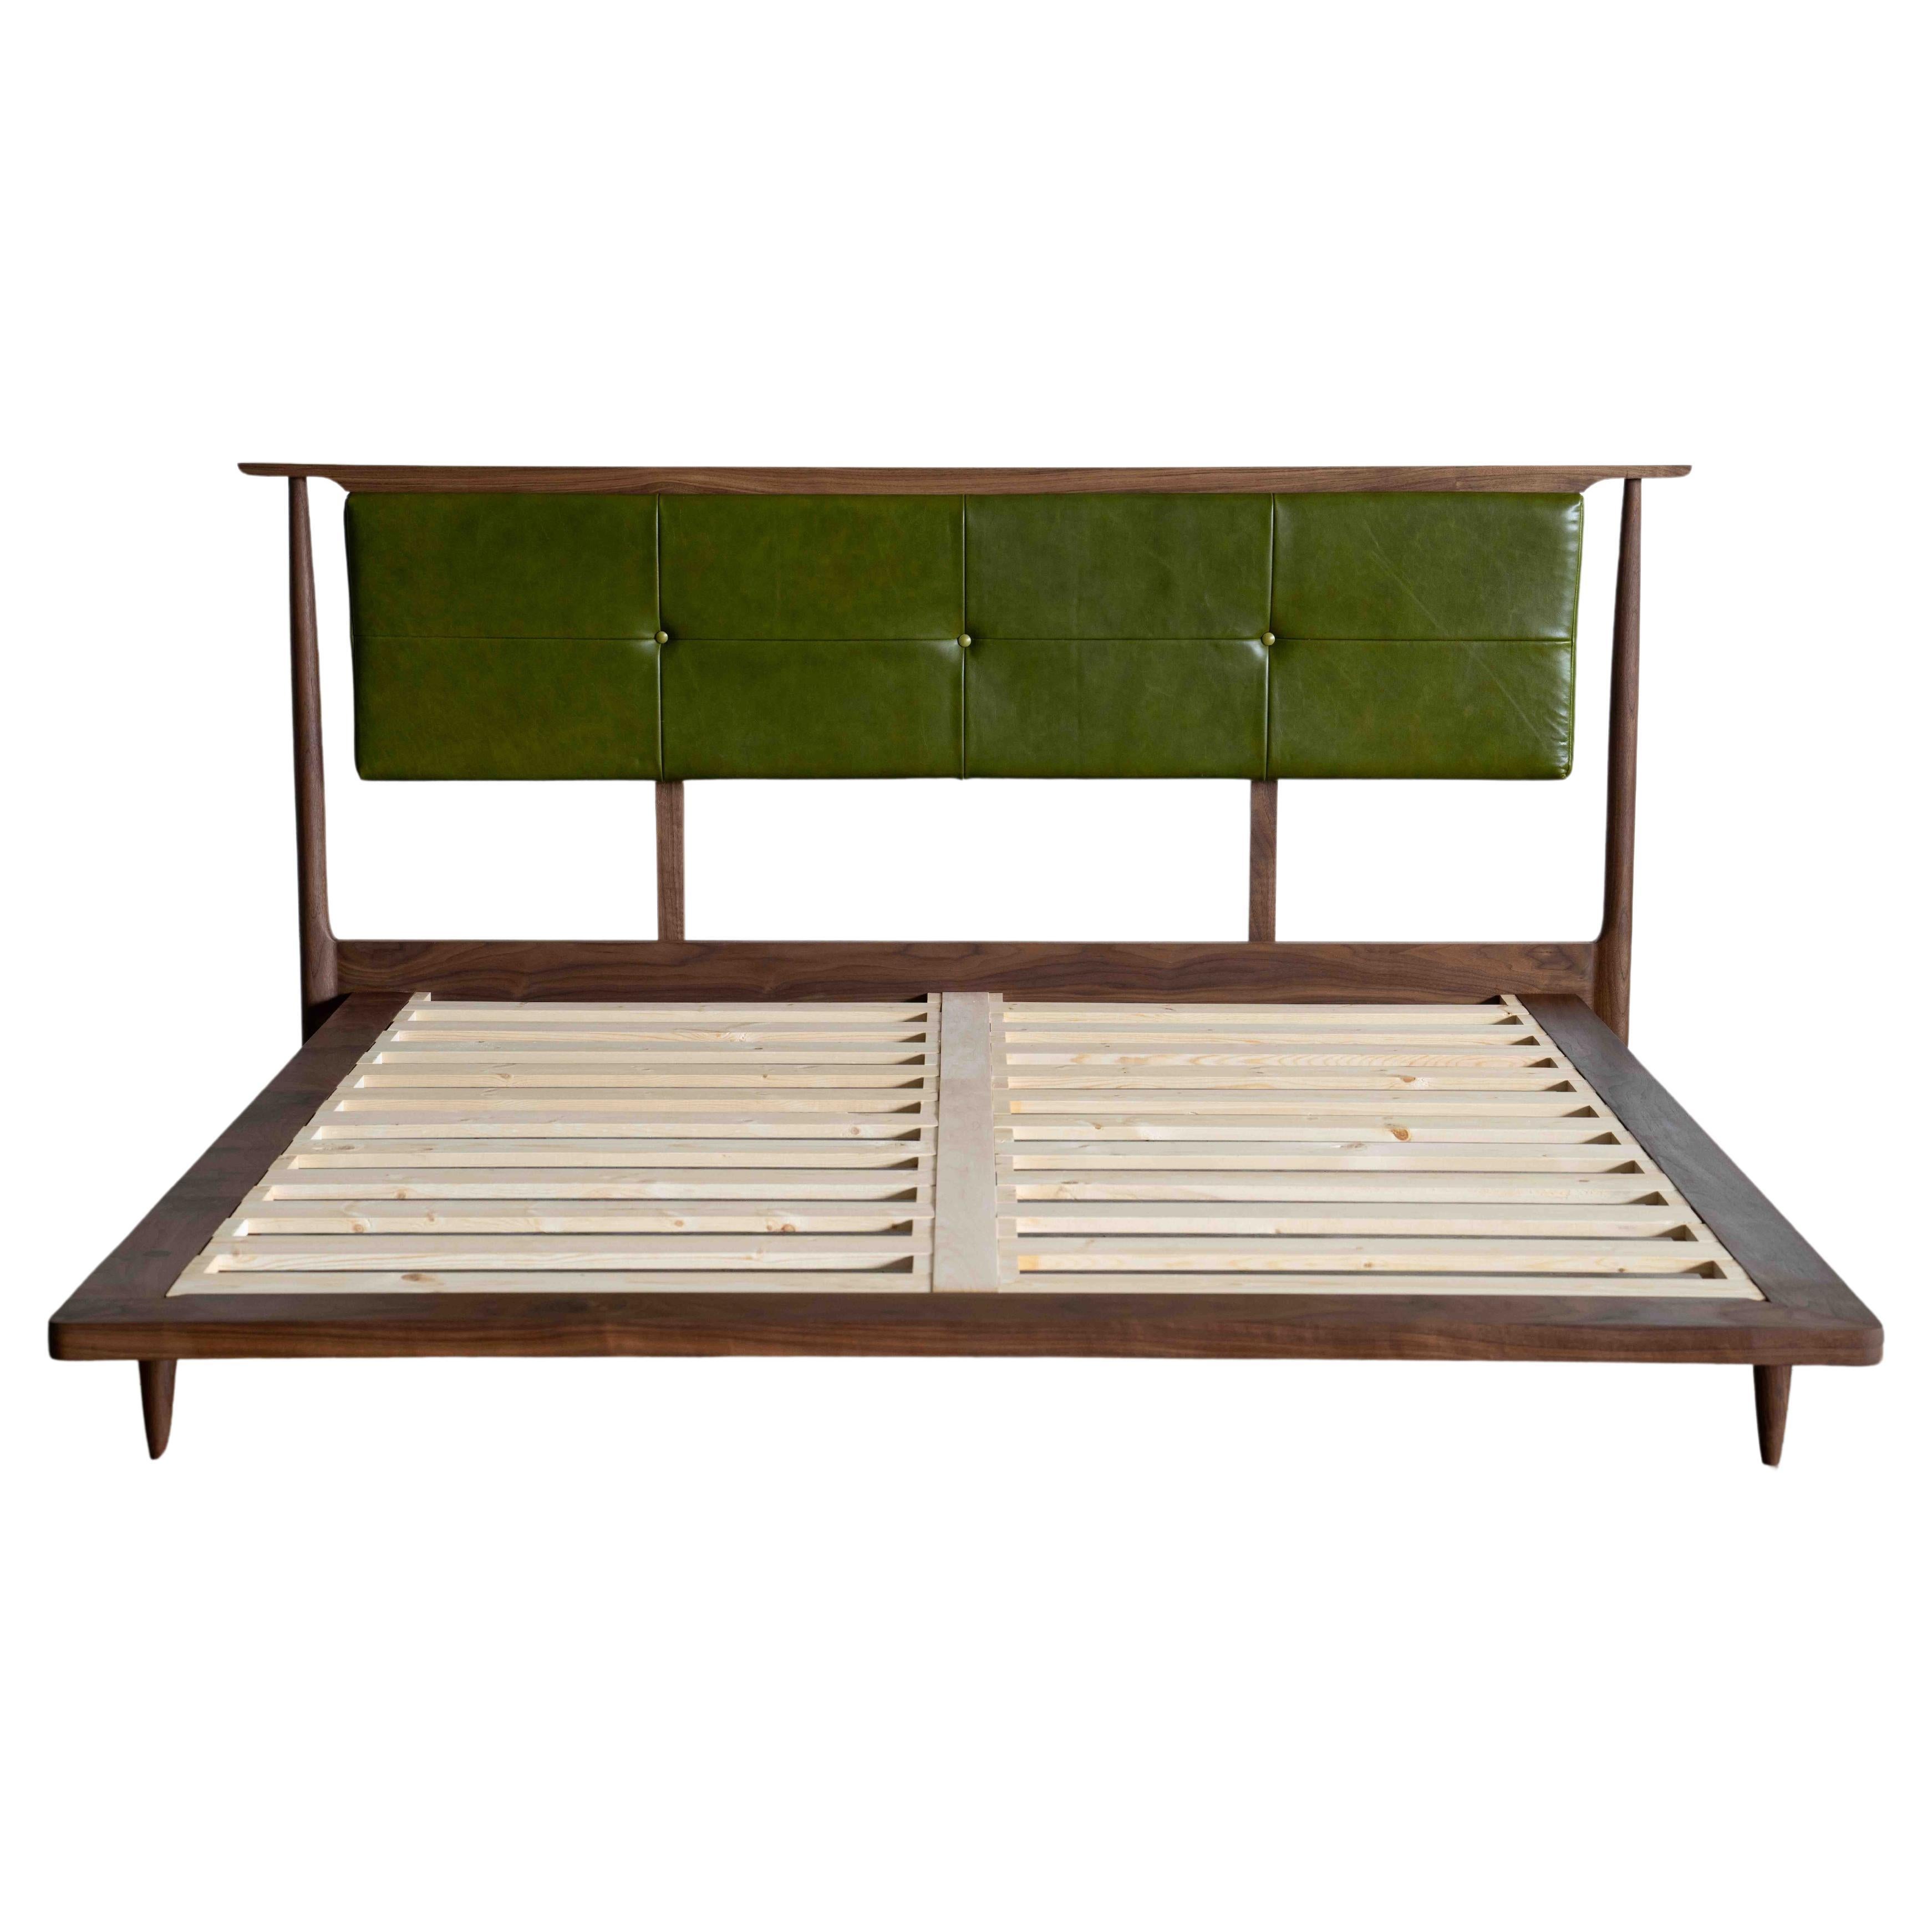 Bed No. 3.5

Our goal with this bed has been, first and foremost, to construct a piece of furniture that will last well over 50 years without issue. Quality of material and construction is our focus. I hope you like the design and find the